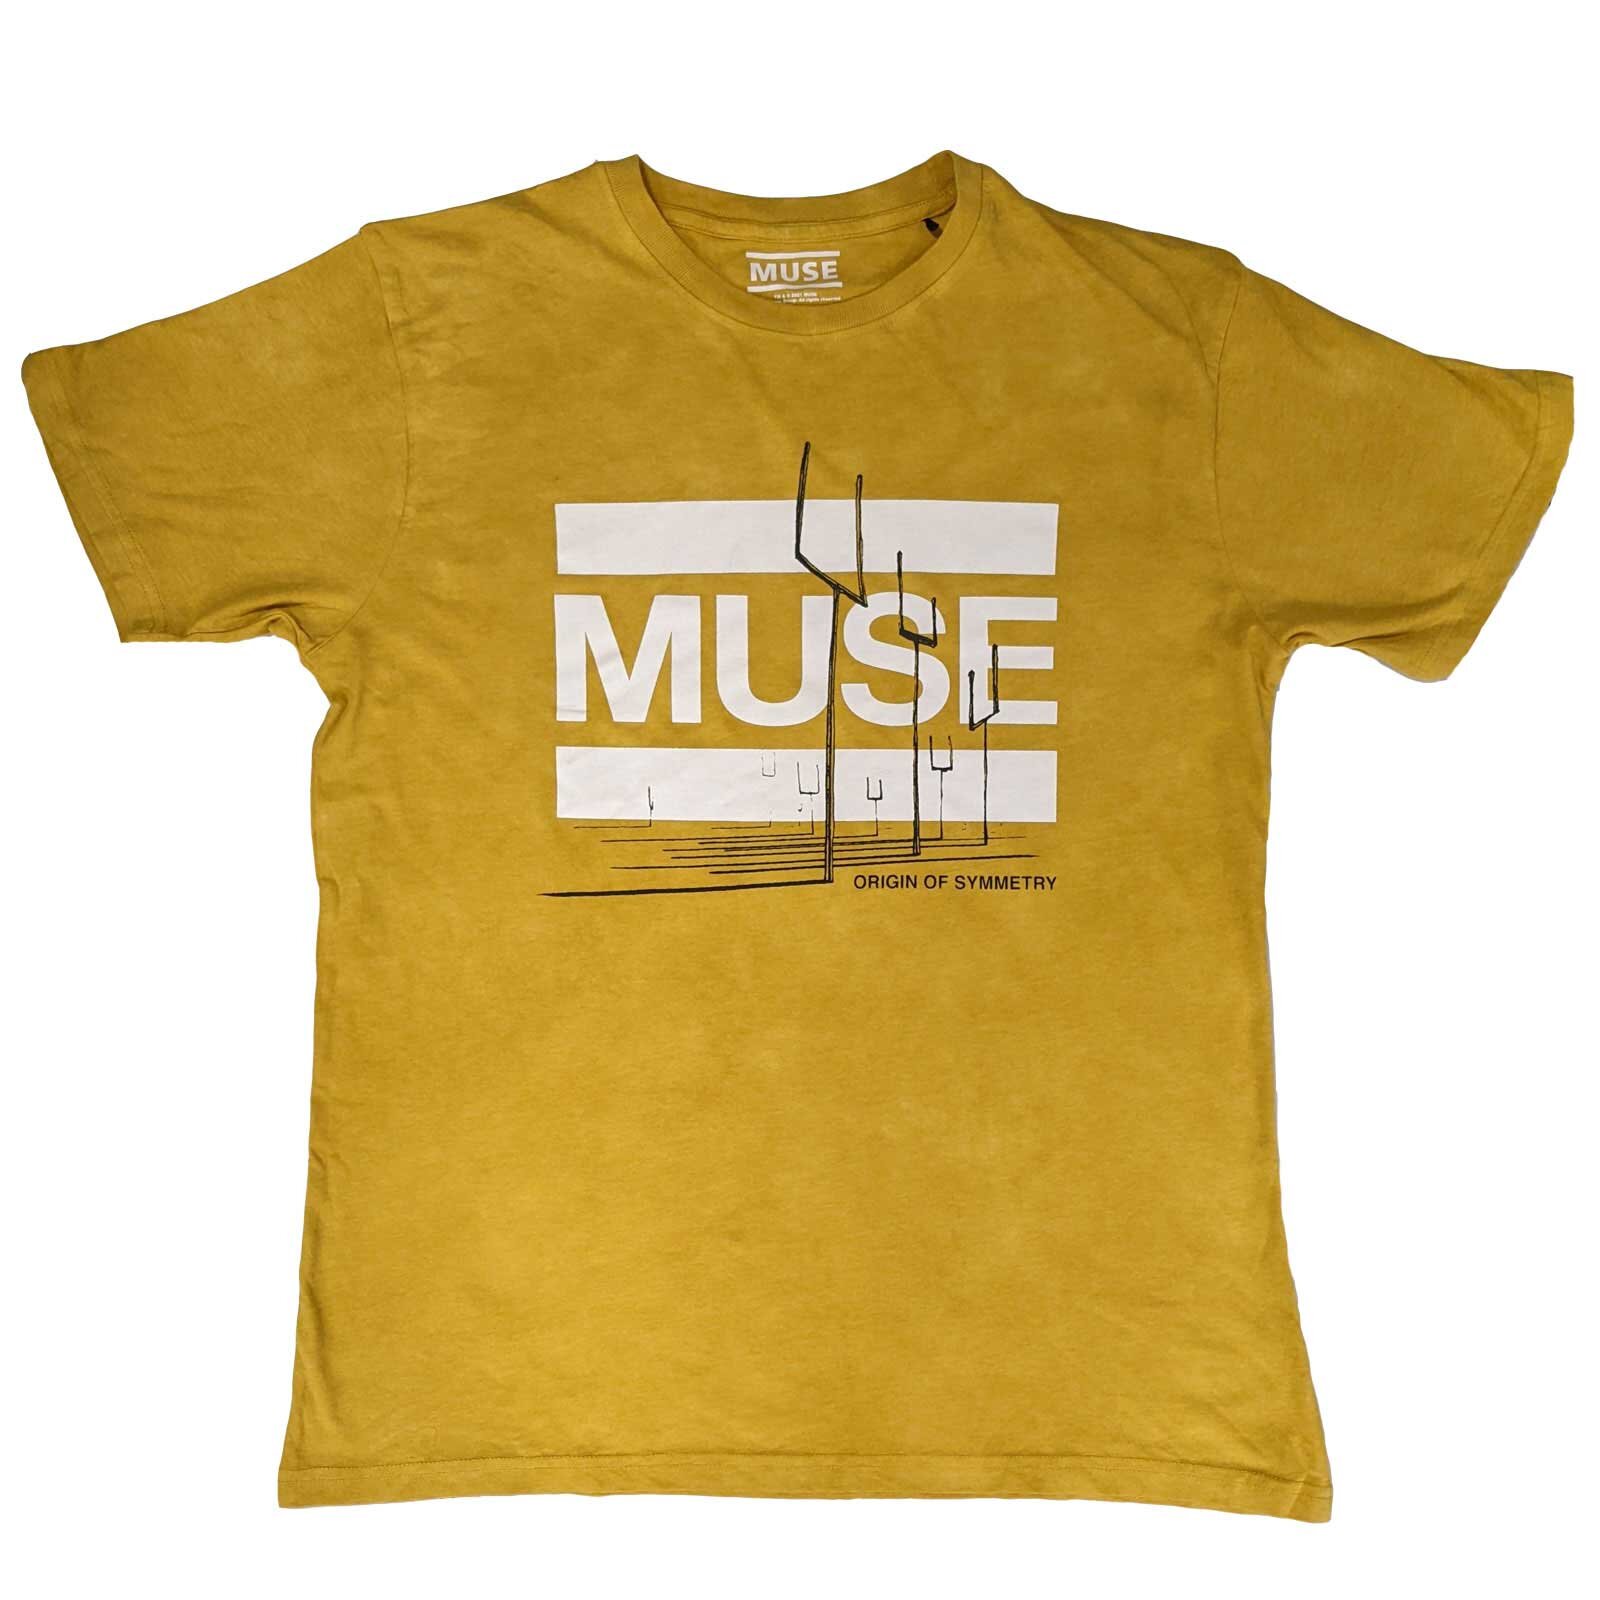 Rockoff MUSE Unisex T-Shirt: Origin of Symmetry (Wash Collection) Size S : photo 1